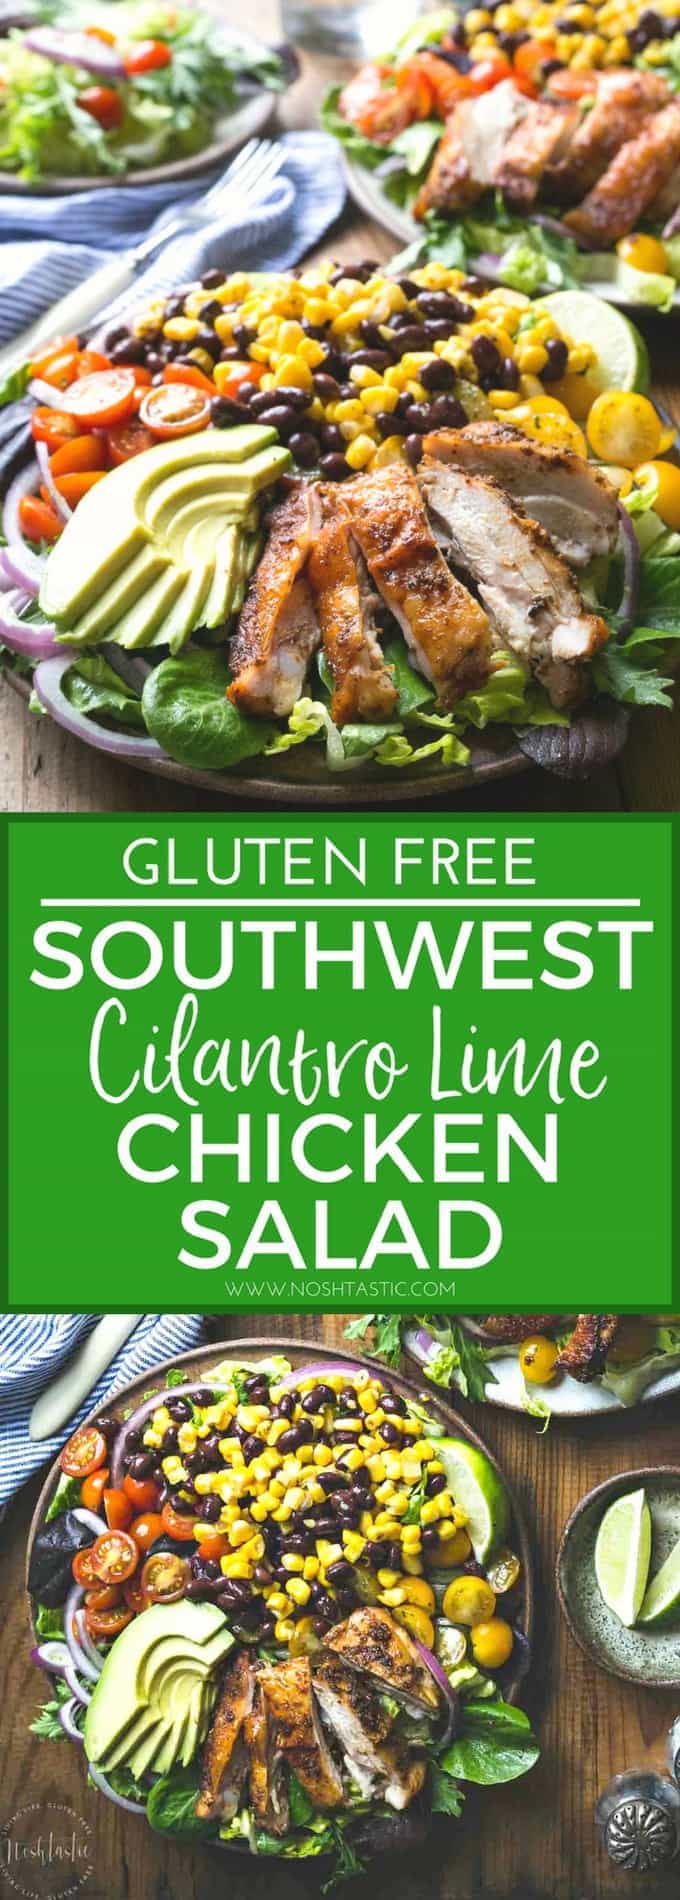 Southwest Chicken Salad with Cilantro Lime Dressing ...